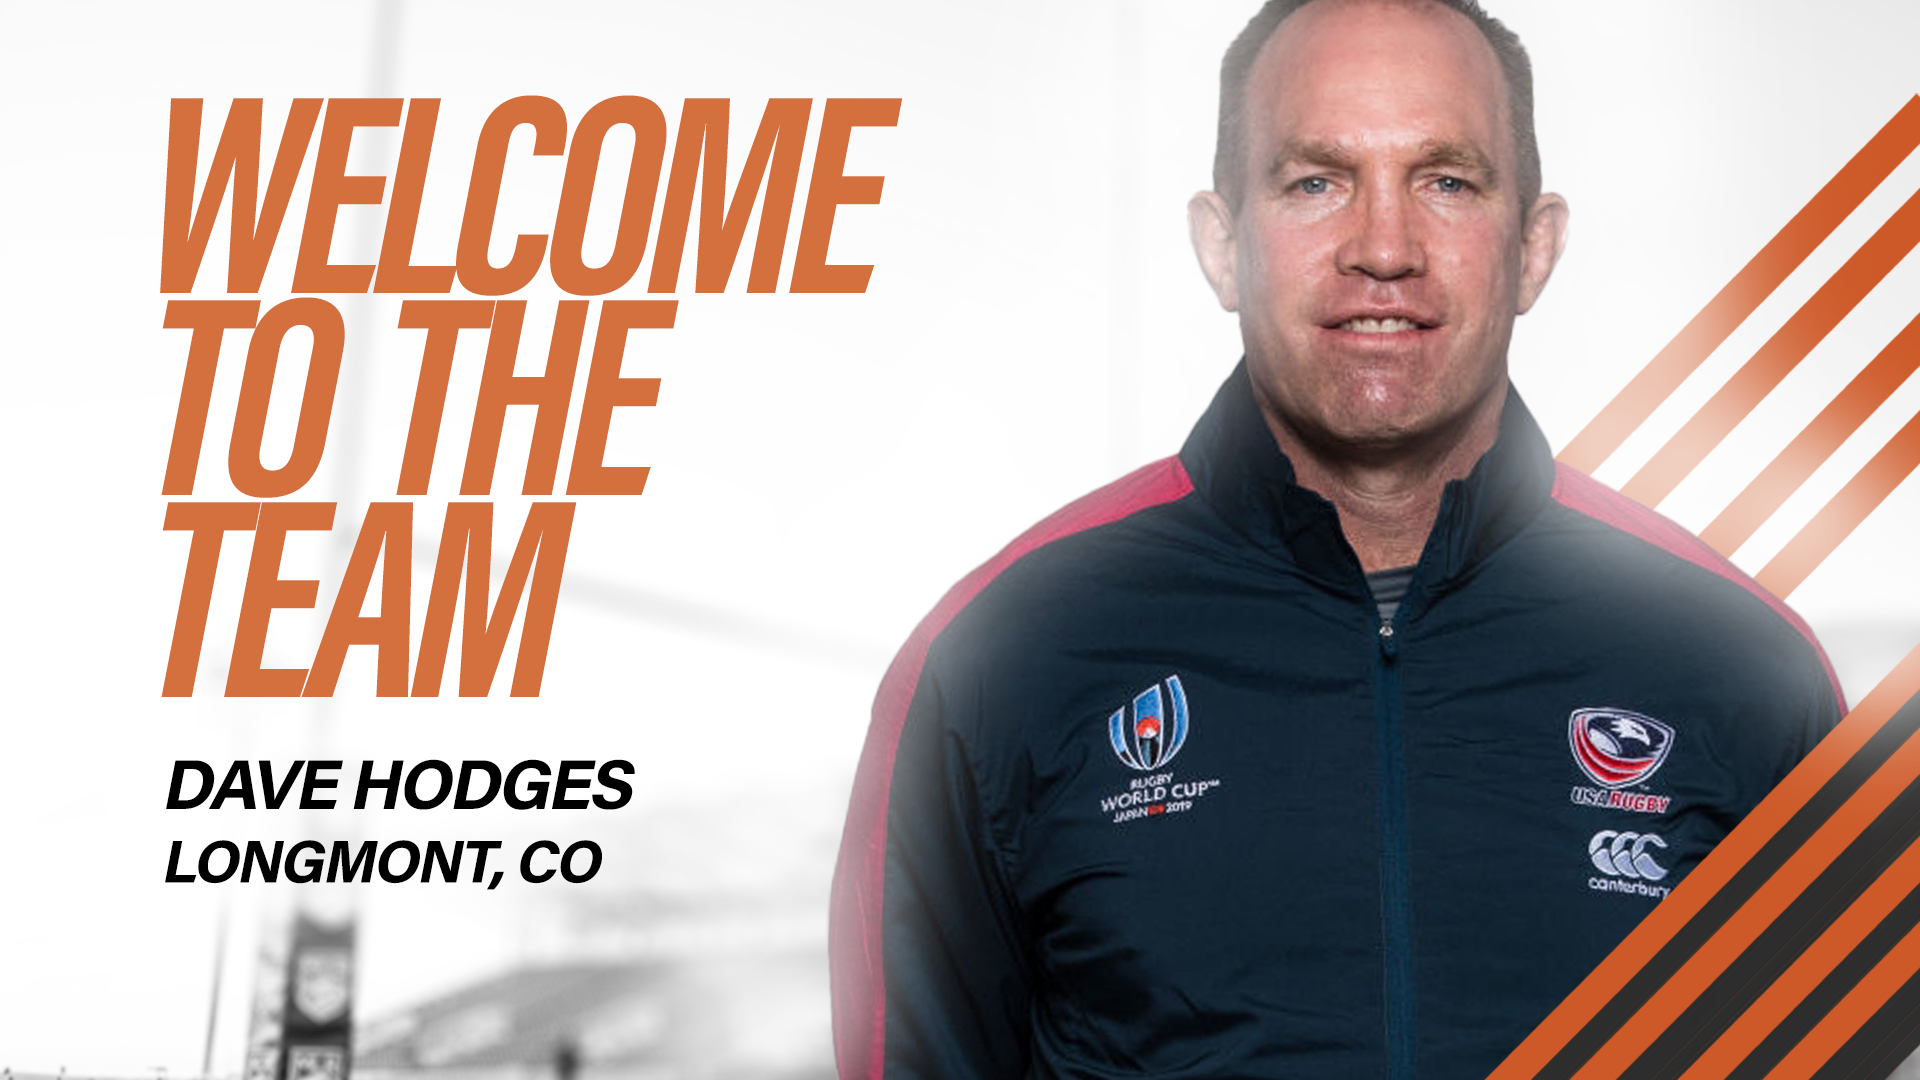 AG Rugby Hires USA Rugby Hall of Famer Dave Hodges As Director of Player Personnel